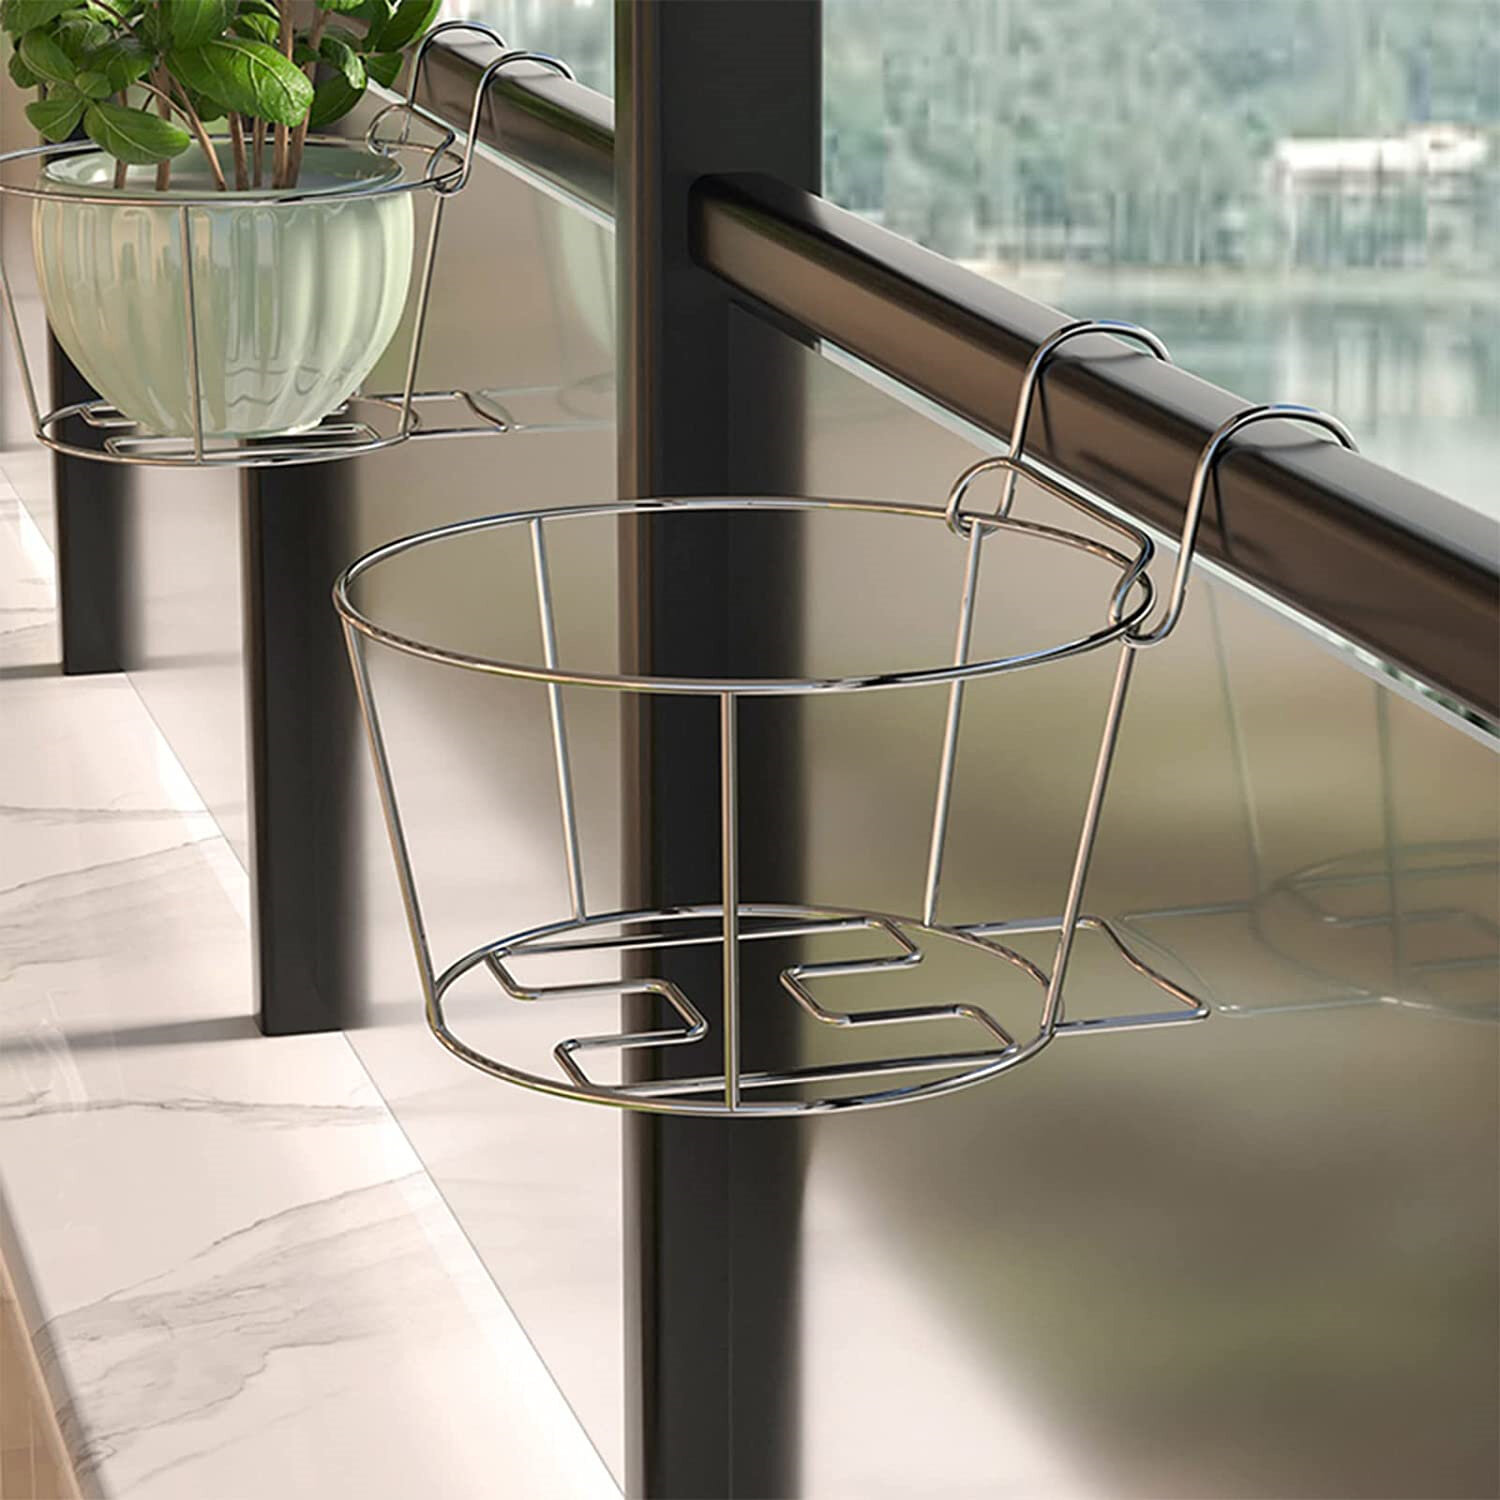 Railing Flower Pot Holder,Over The Deck Balcony Railing Hanging Shelf Flower Pot Brackets Metal Plant Stand Planter Container Accessories